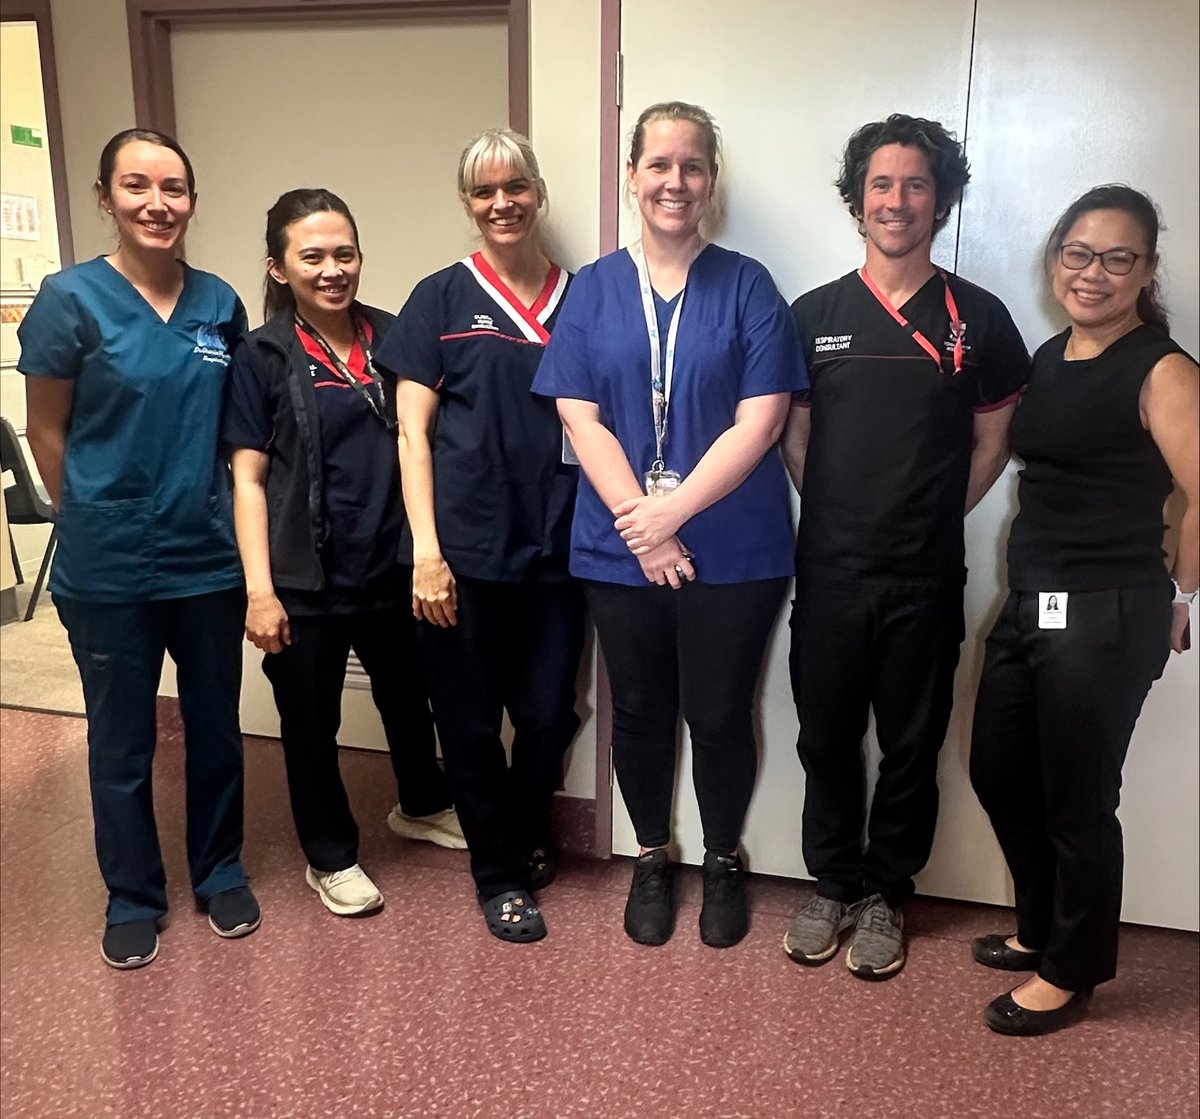 Congratulations to the #respiratory team at Royal Perth Hospital who have recruited 100+ #LungCancer patients to #LUCAP
Special thanks to our #Research #Nurse Mae who has been driving the project at #RPH
#LCSM #PatientCare #quality @LungAmbition @CancerAustralia @Lungfoundation